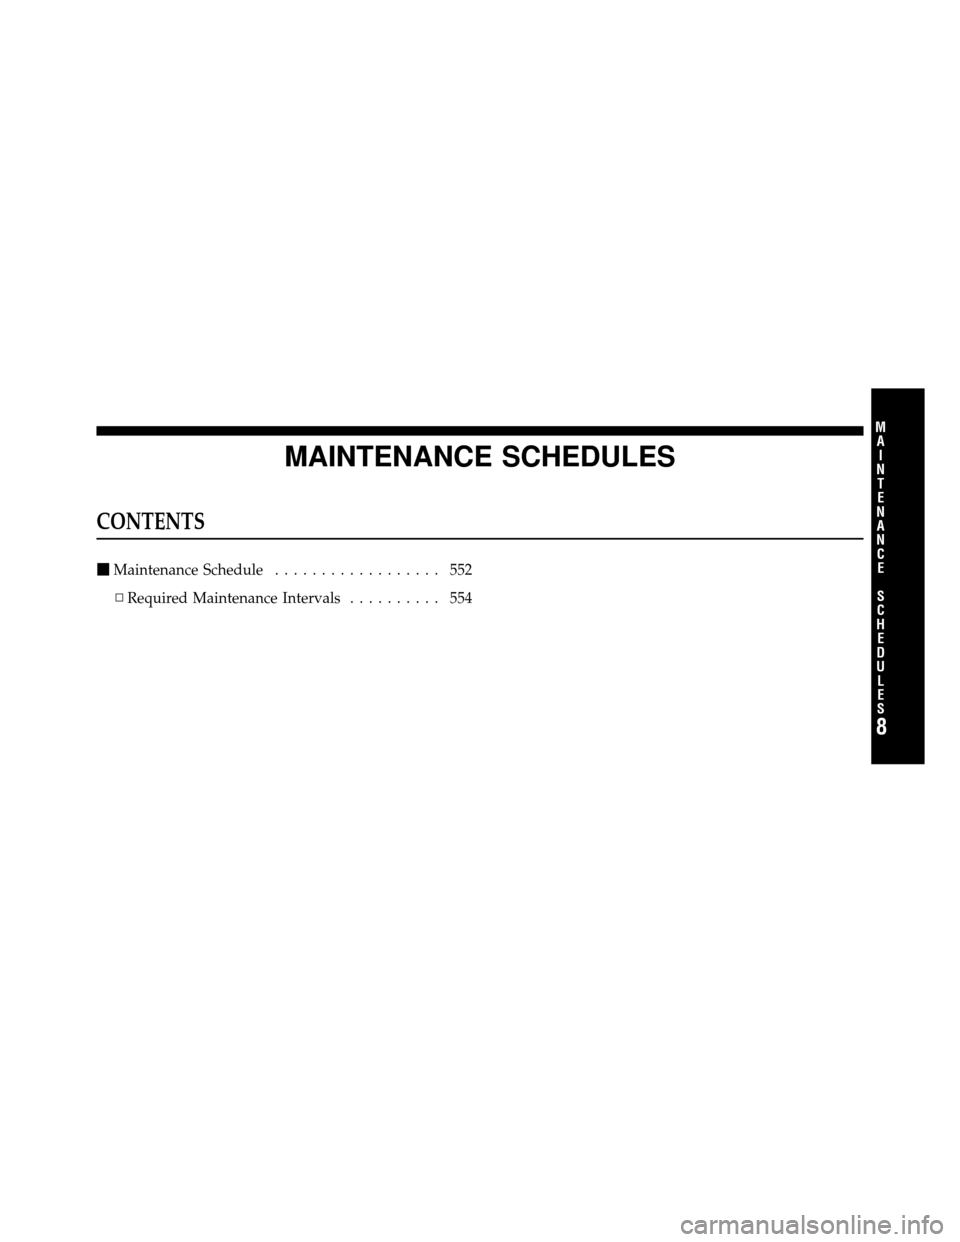 DODGE JOURNEY 2012 1.G Owners Manual MAINTENANCE SCHEDULES
CONTENTS
Maintenance Schedule .................. 552
▫ Required Maintenance Intervals .......... 554
8
M
A I
N T
E
N A
N CE
S
C
H E
D
U L
E
S 